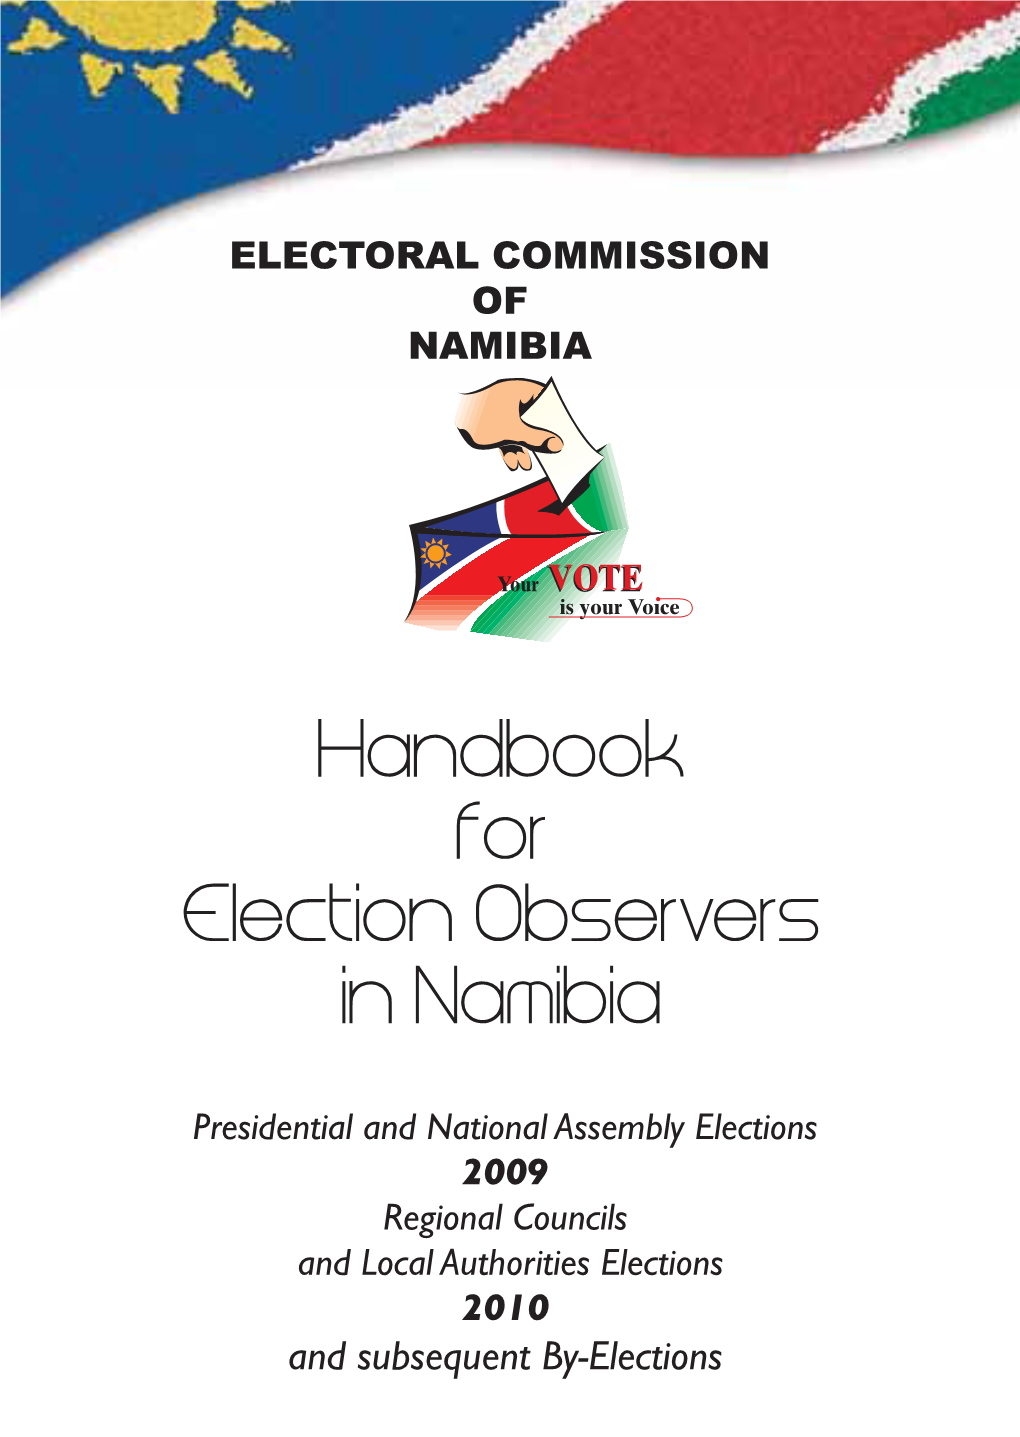 Handbook for Election Observers in Namibia